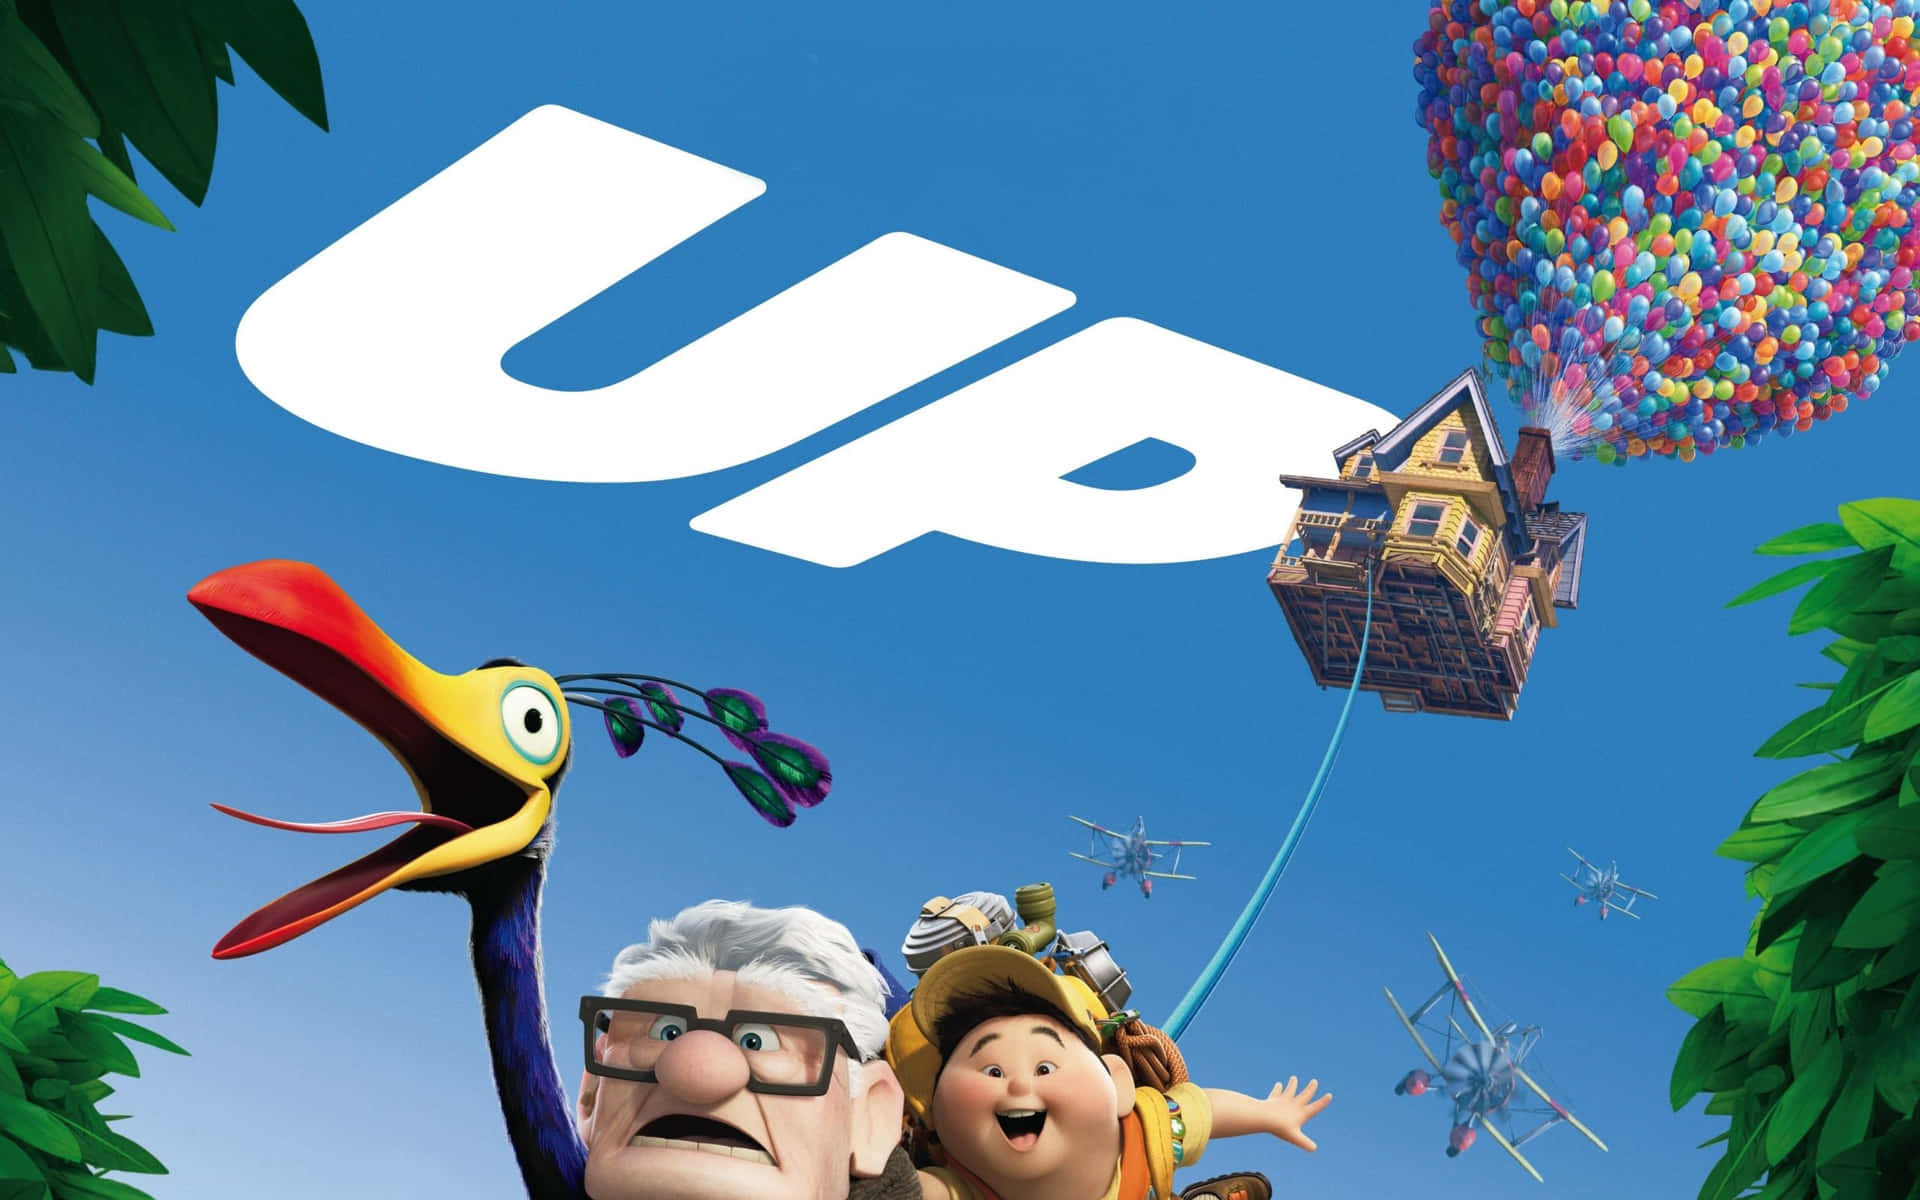 100+] Up Movie Wallpapers